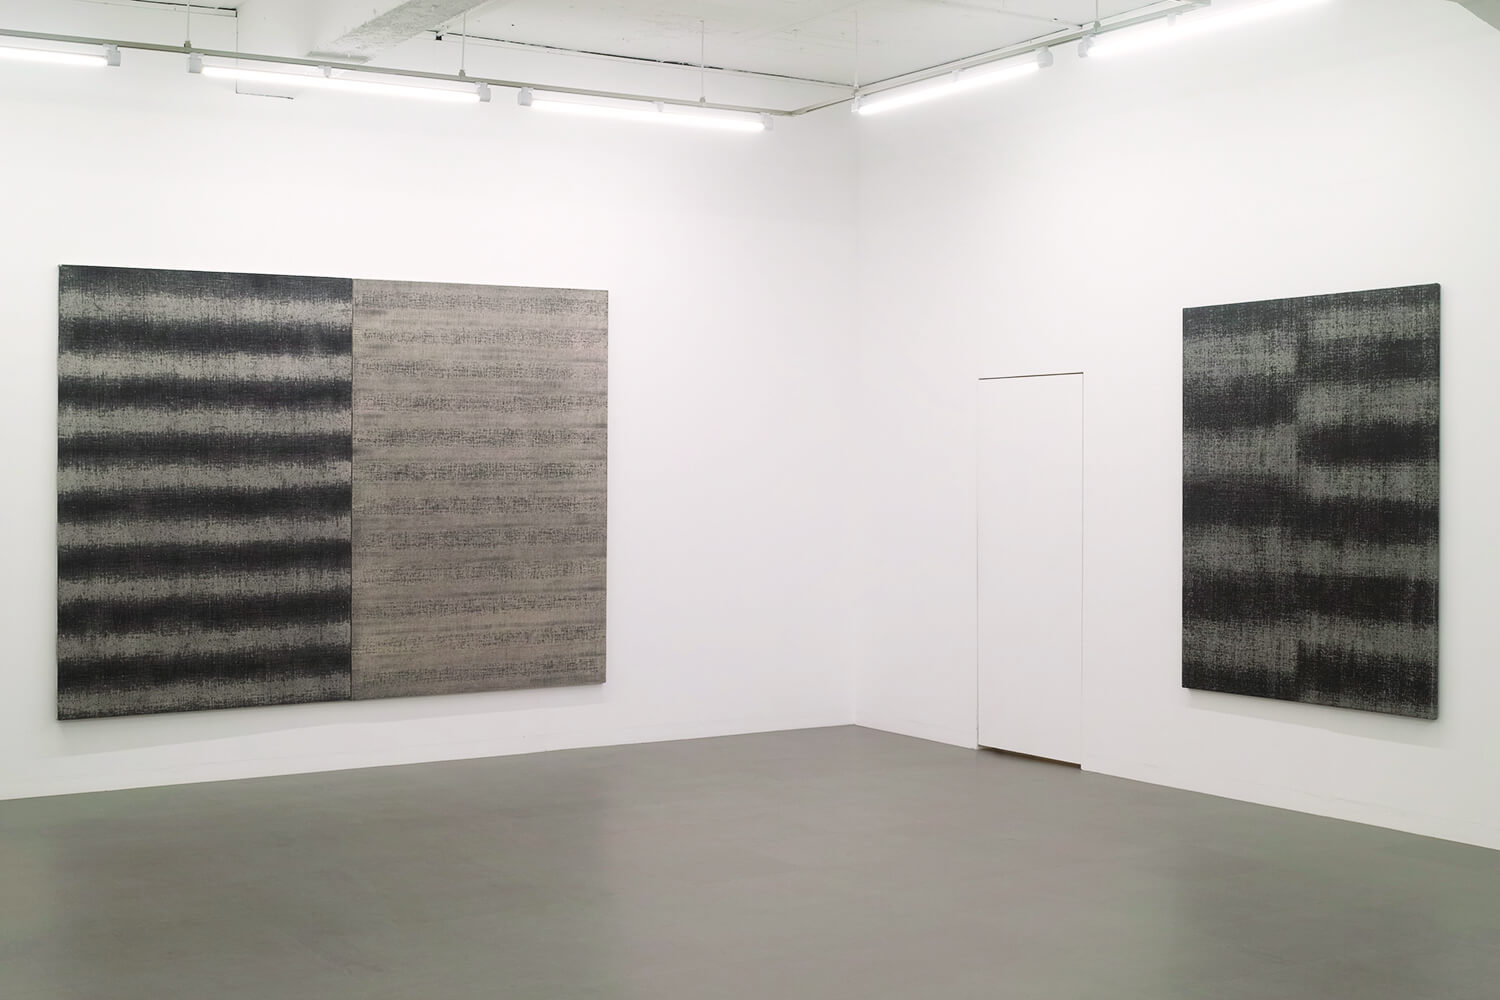 Drawing by drawing, Oil on canvas, 194 x 130 cm each (set of 2), 1979 (left)<br>Drawing by drawing, Oil on canvas, 194 x 130 cm, 1982 (right)